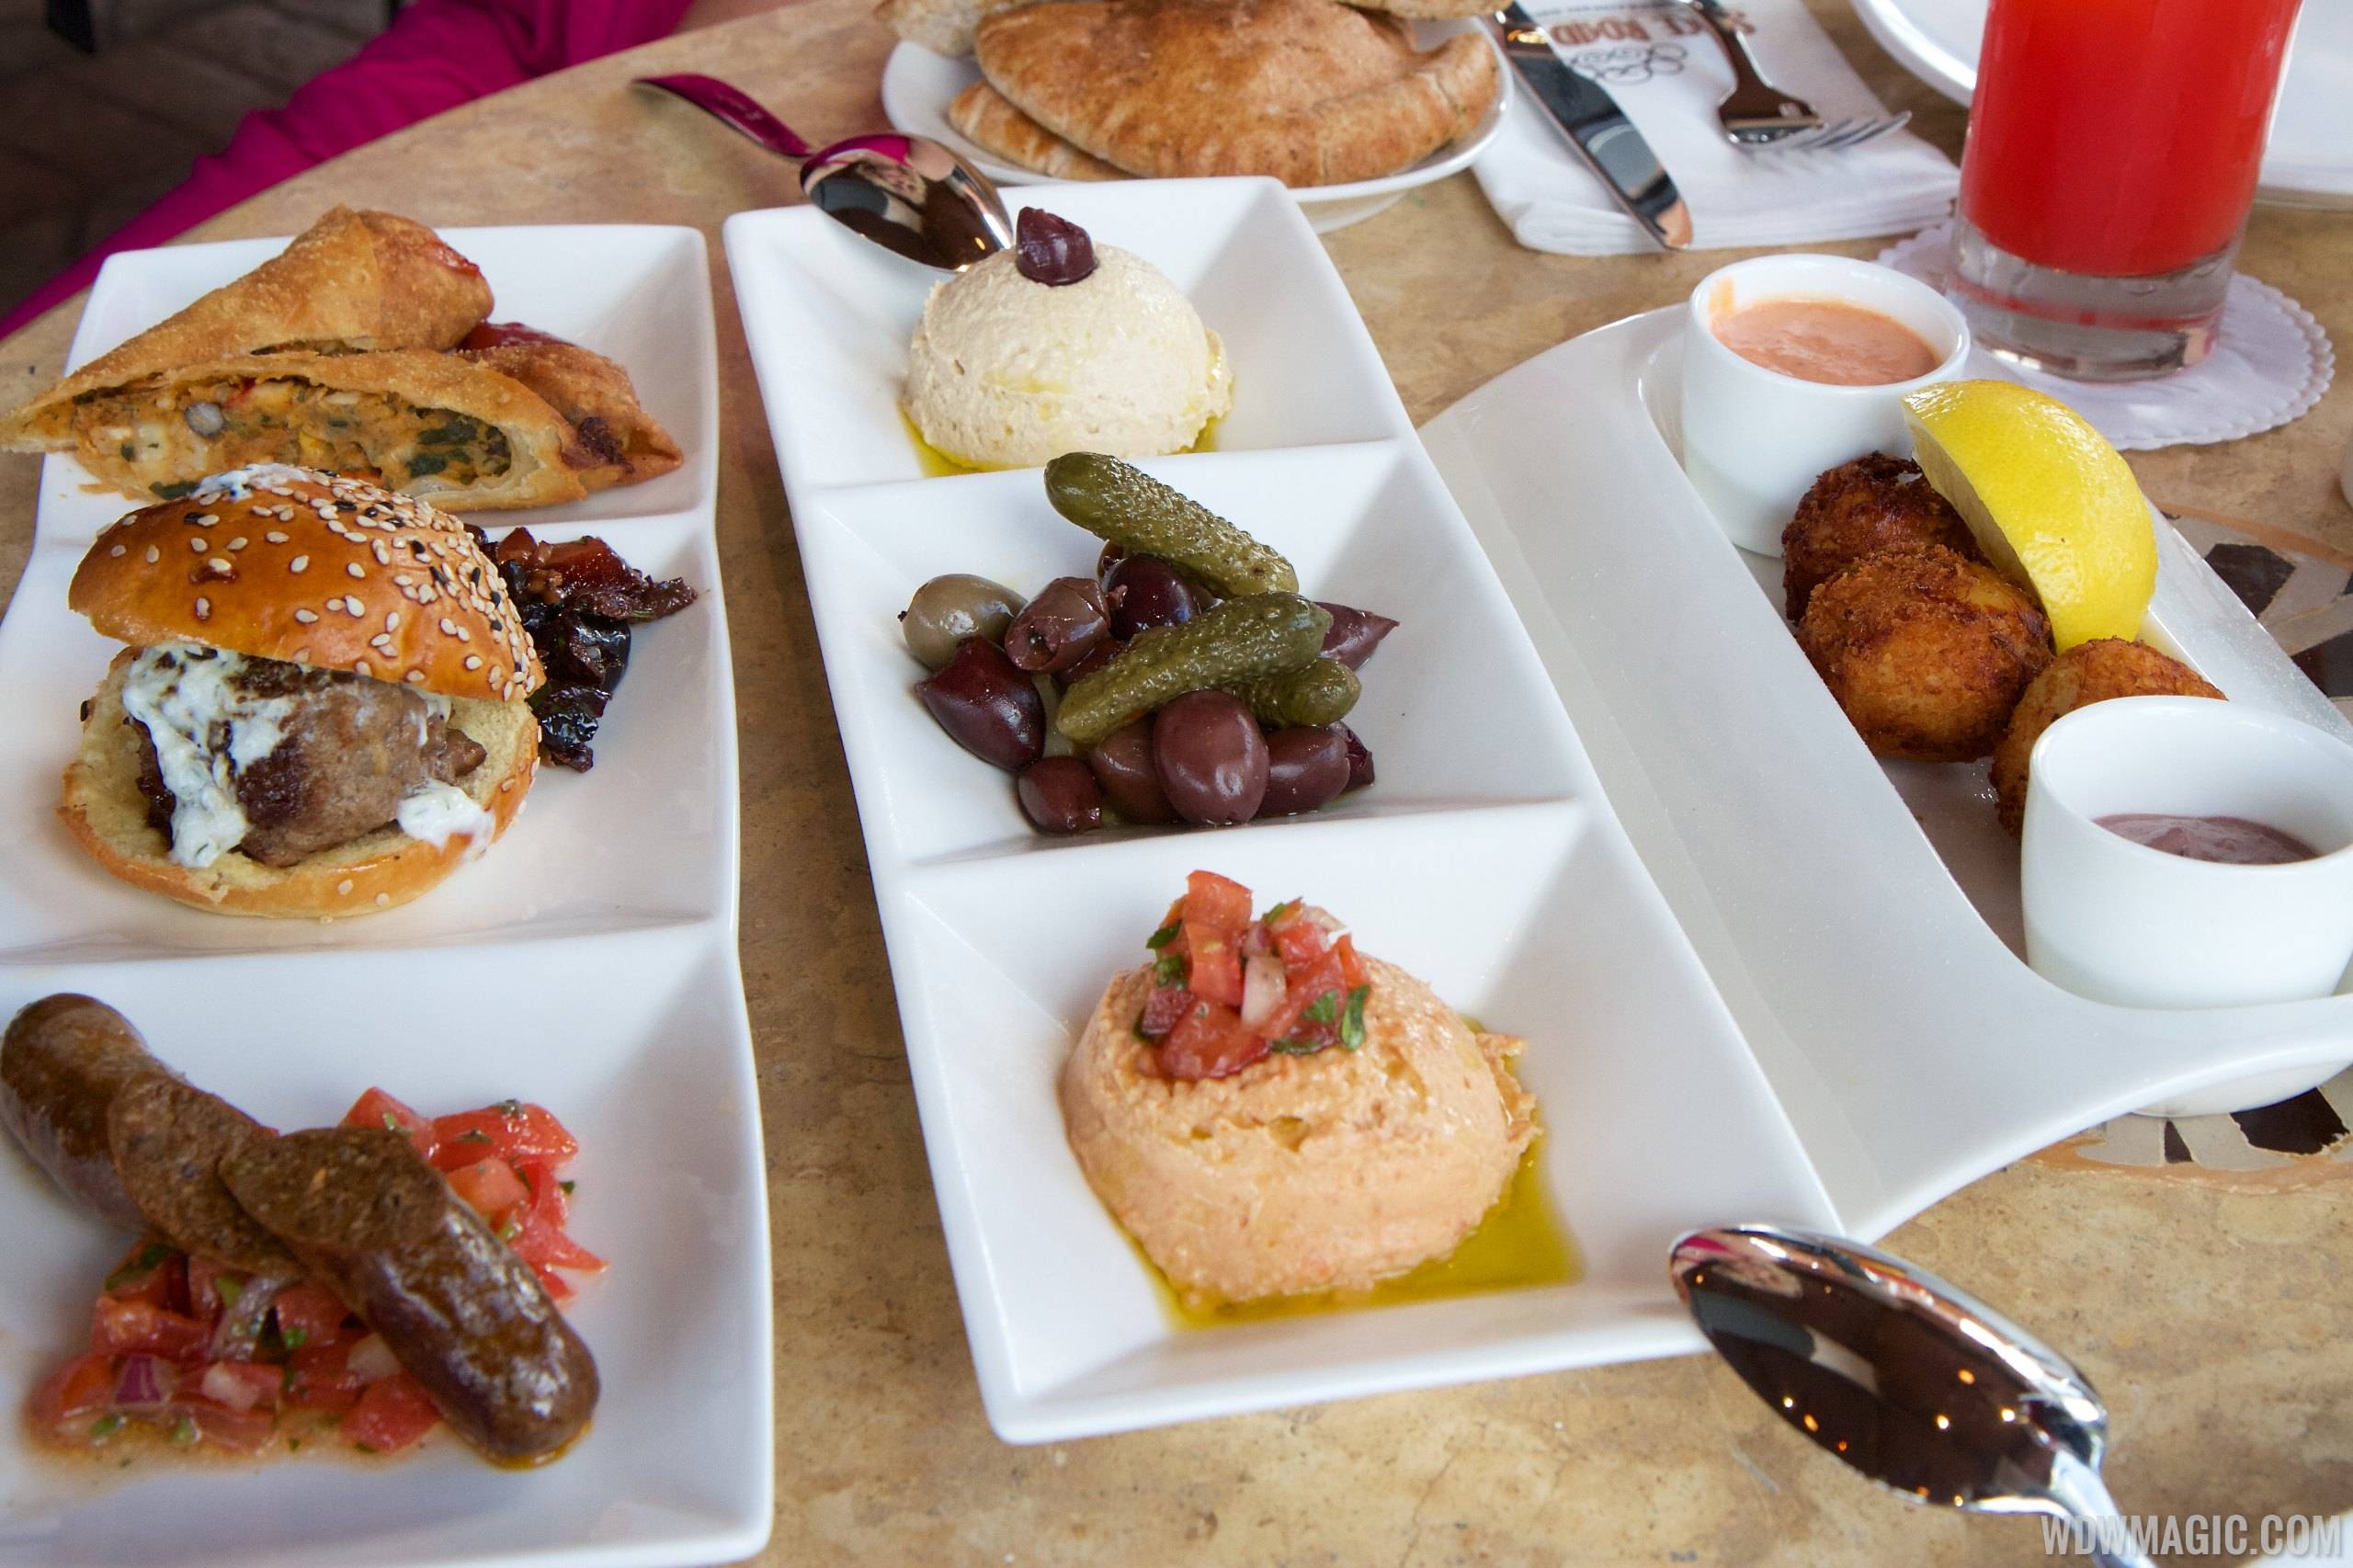 Spice Road Table - Tingis Sampler $16, Hummus and Olives $10, Salted Cod Croquettes $10